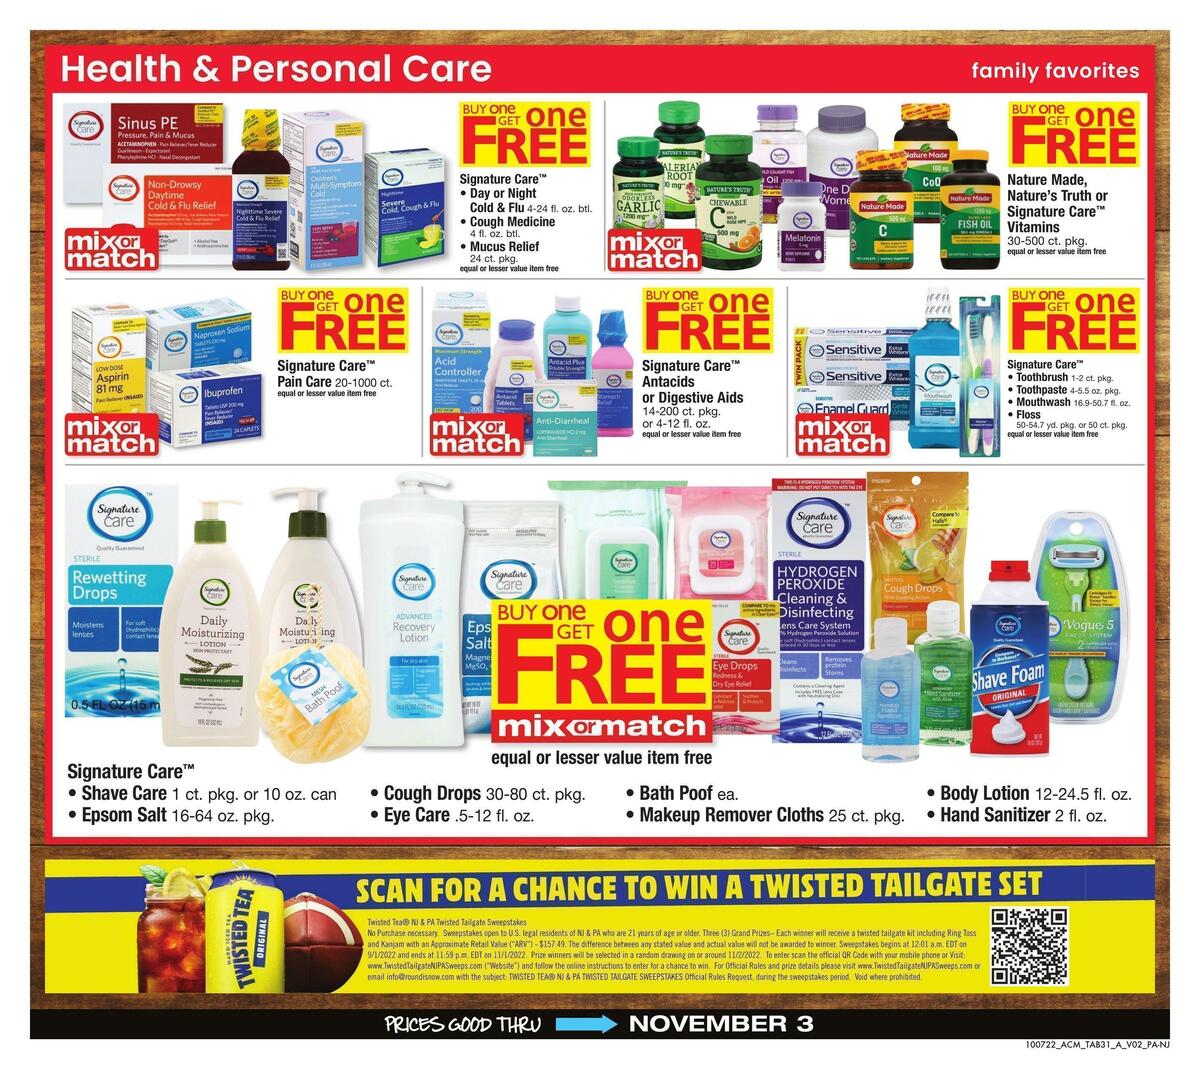 ACME Markets Big Book of Savings Weekly Ad from October 7